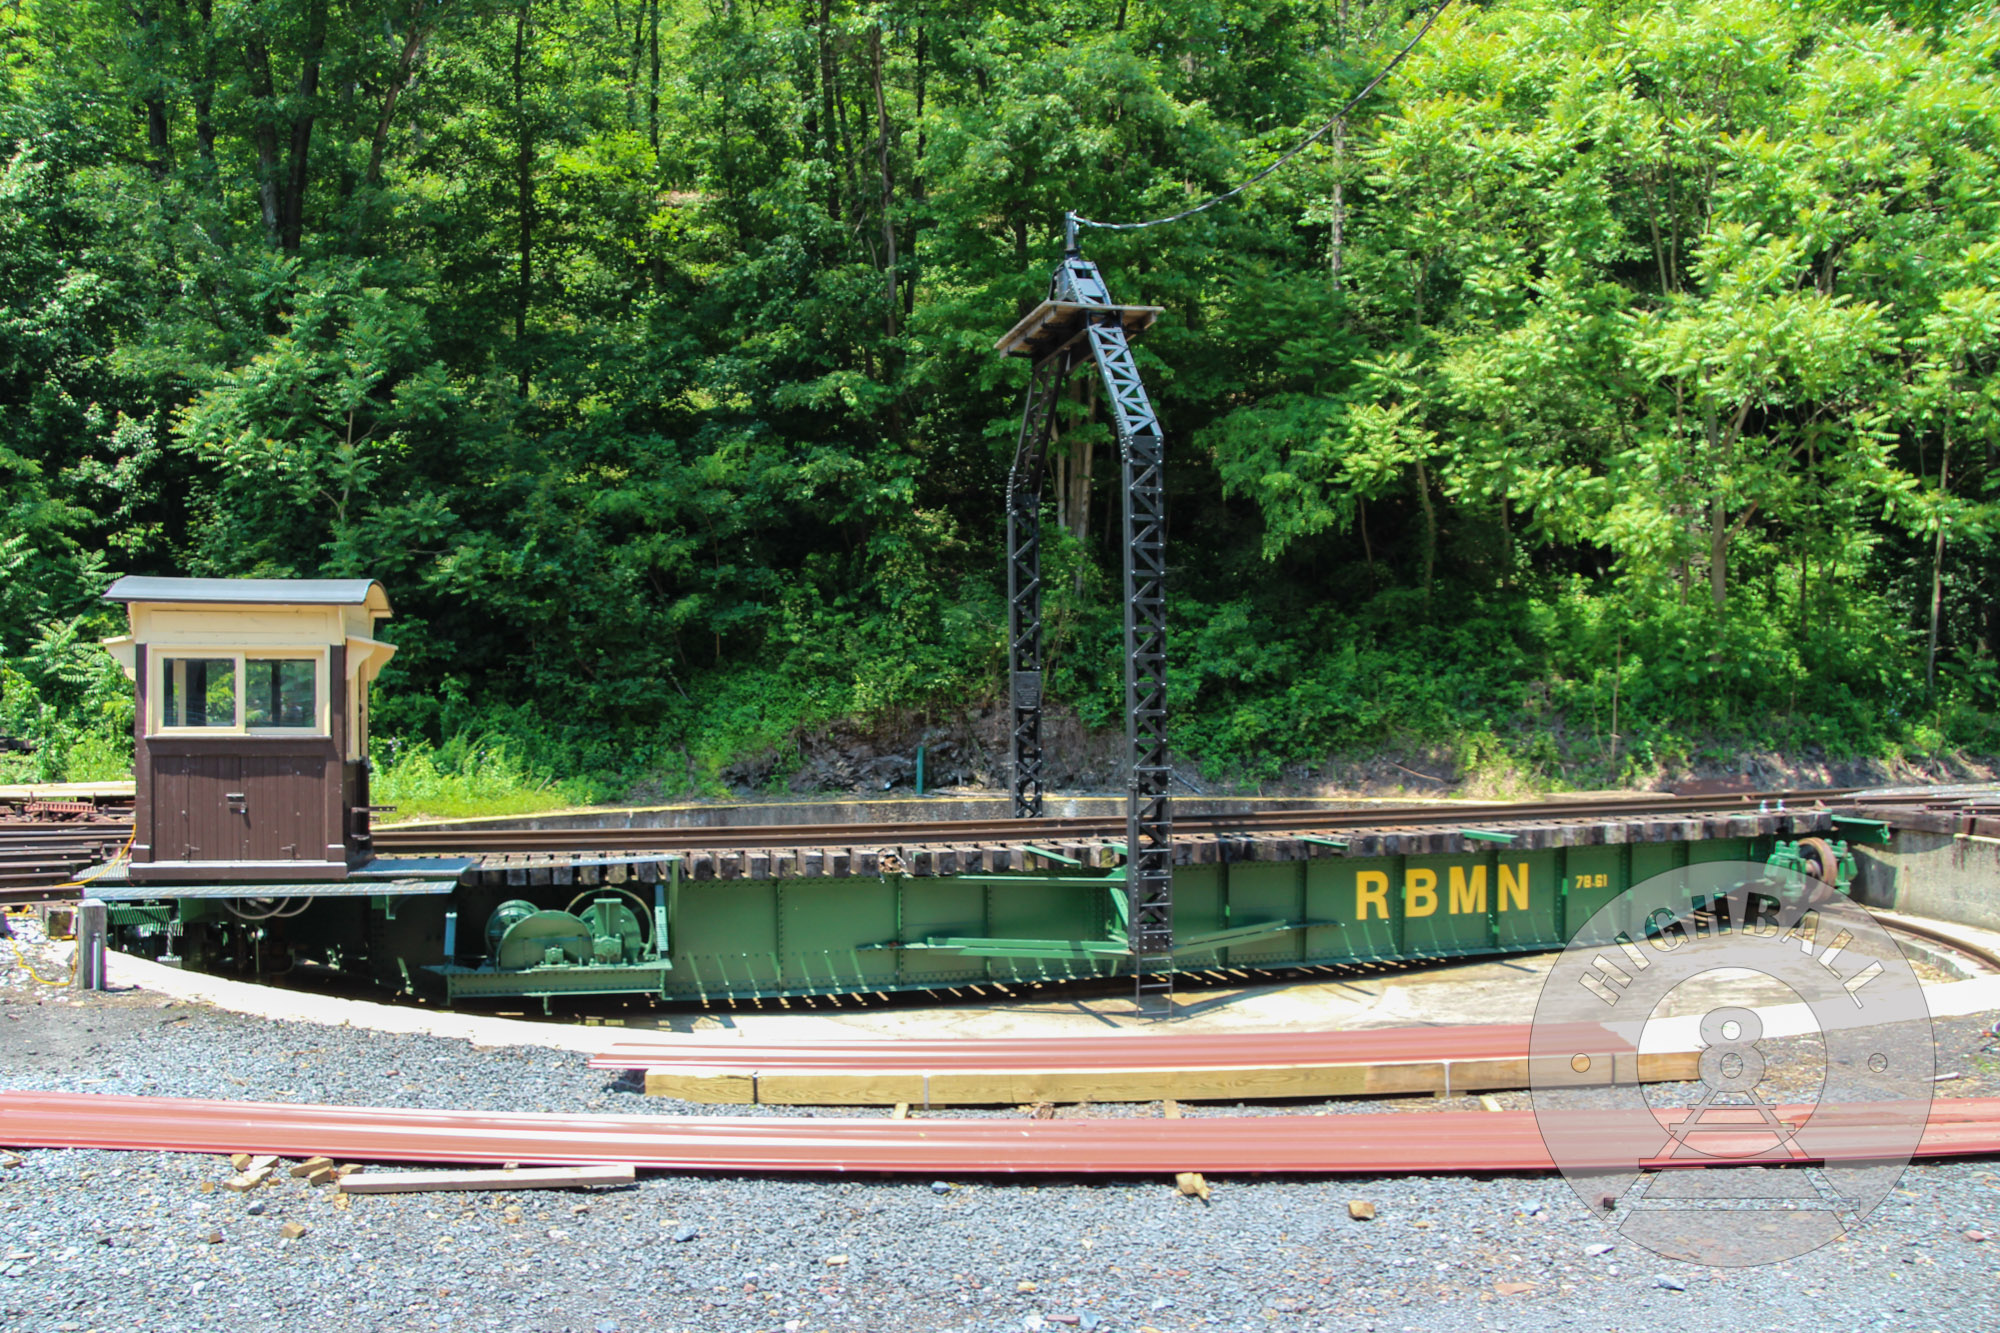 An old turntable at the workshops of the Reading Blue Mountain & Northern Railroad, Port Clinton, Pennsylvania, USA, 2016.